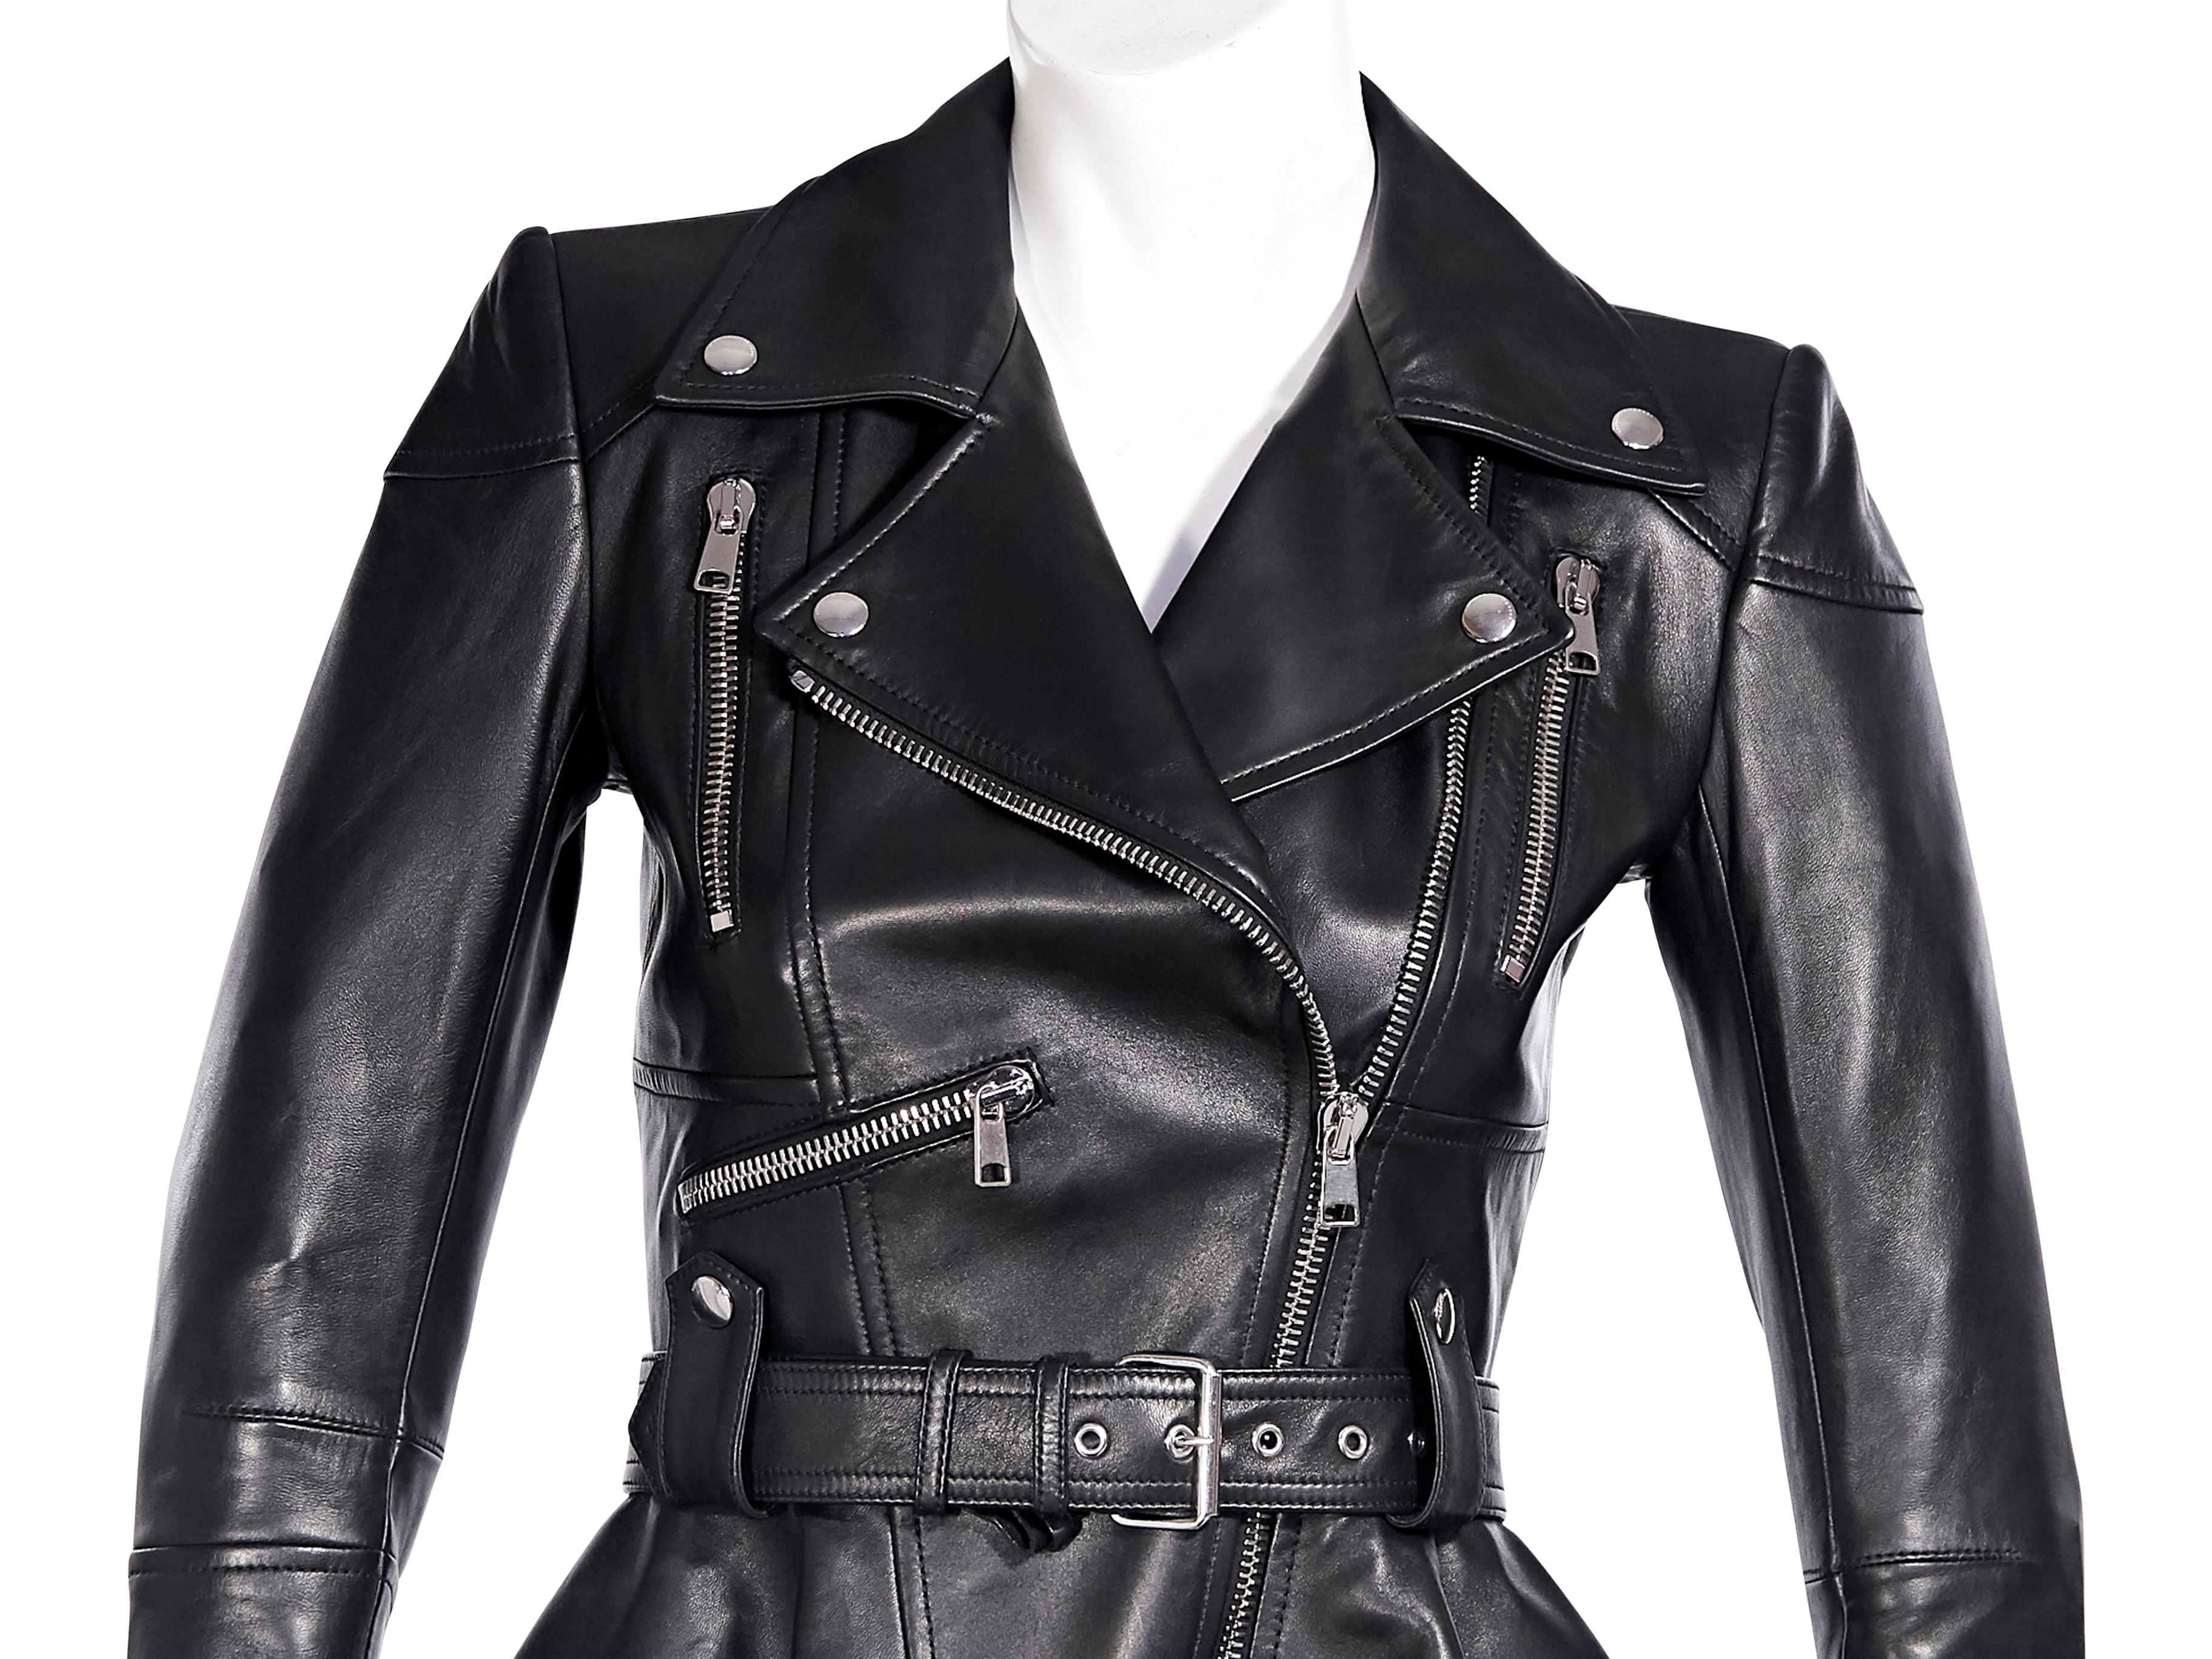 Product details:  Black leather peplum jacket by Alexander McQueen.  Notched lapel.  Long sleeves.  Asymmetrical zip-front closure.  Adjustable belted waist.  Chest and waist zip pockets.  Silvertone hardware.  32